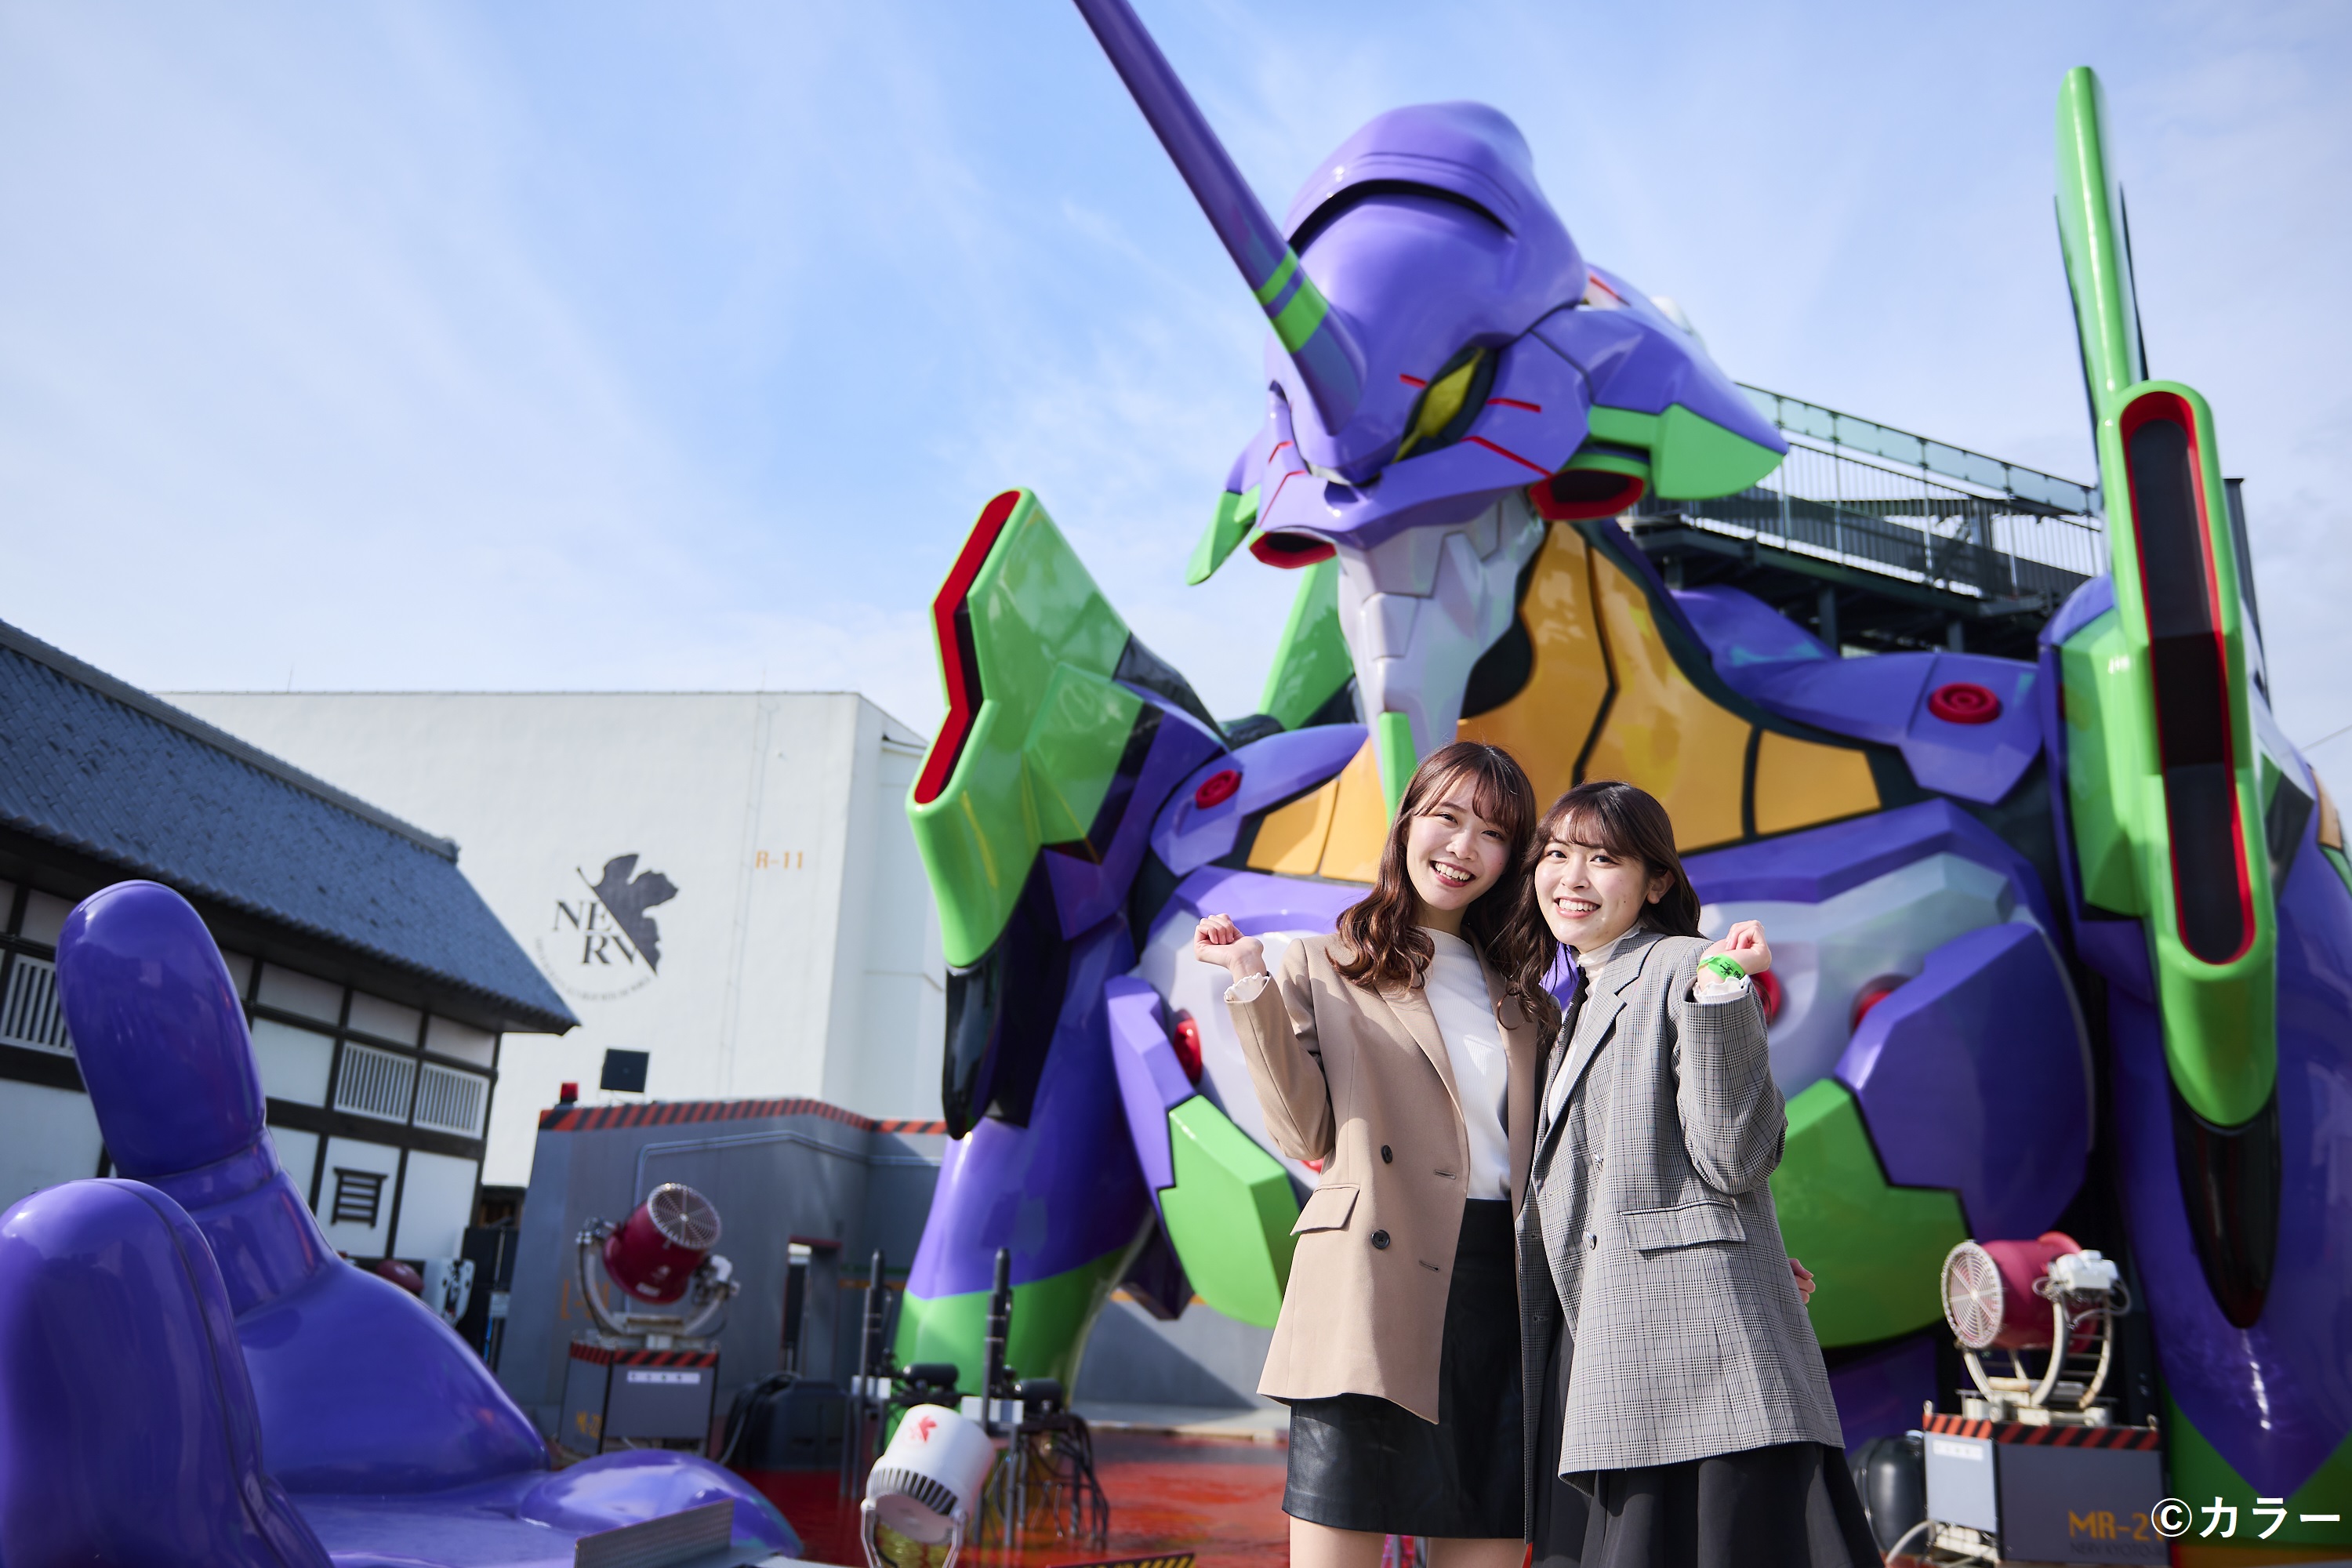 TOEI Kyoto Studio Park Admission Ticket + A Evangelion Original Cup (with soft drink) <Visit a theme park filled with Toei anime character events, ninja experiences, and transformation attractions that will provide an unforgettable experience.>